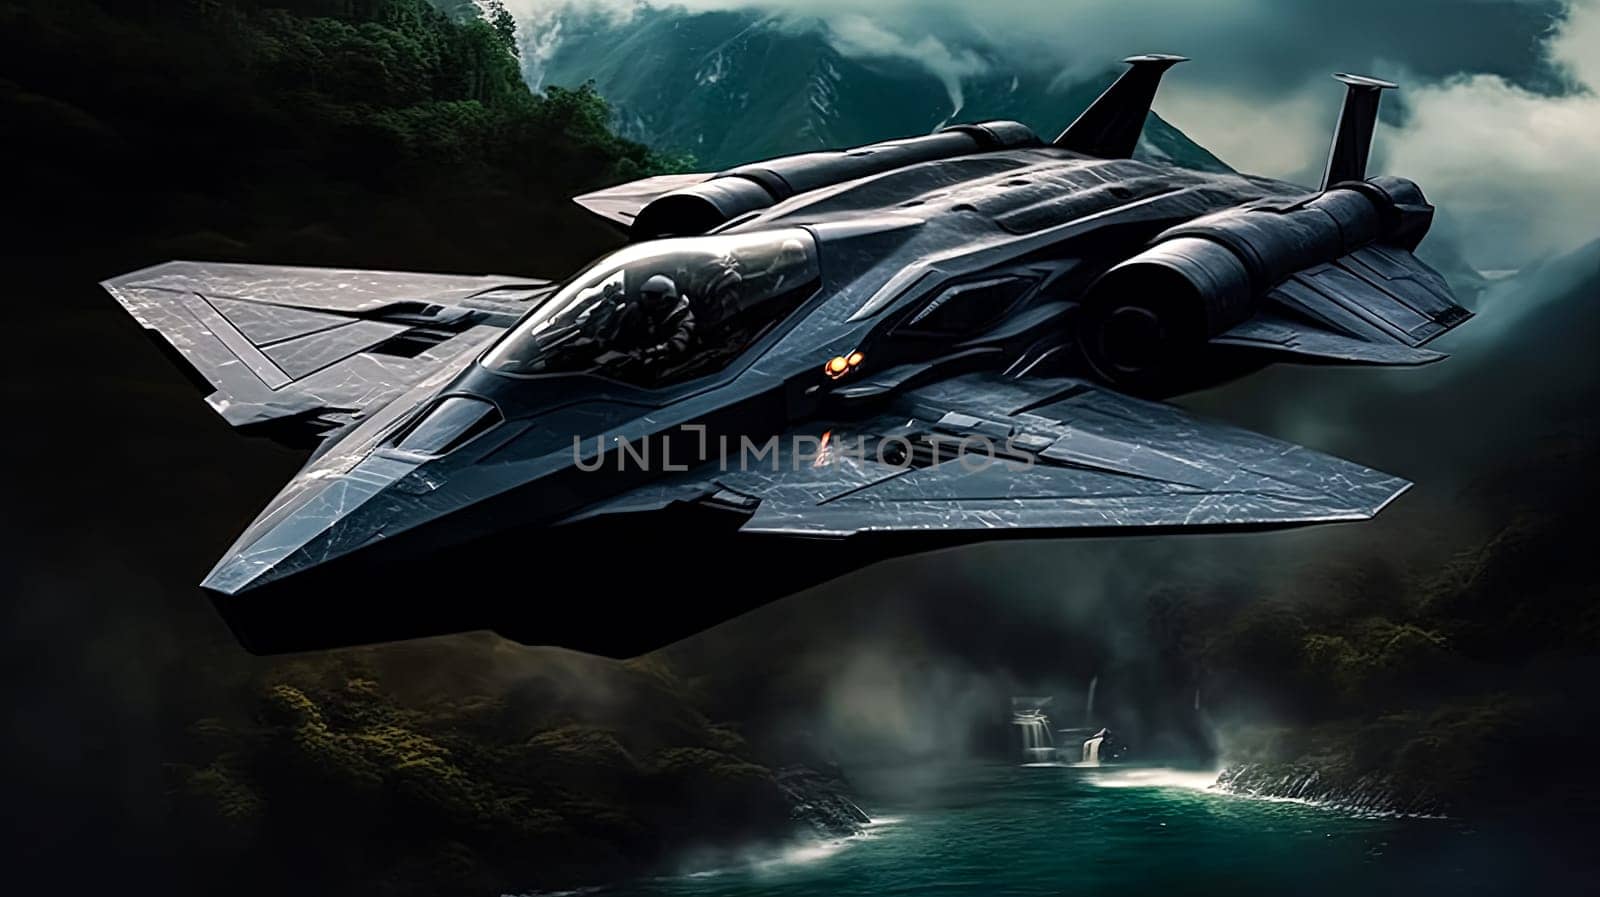 A large, futuristic space ship is flying through a cloudy sky. Scene is dark and mysterious, with the space ship being the only visible object in the scene